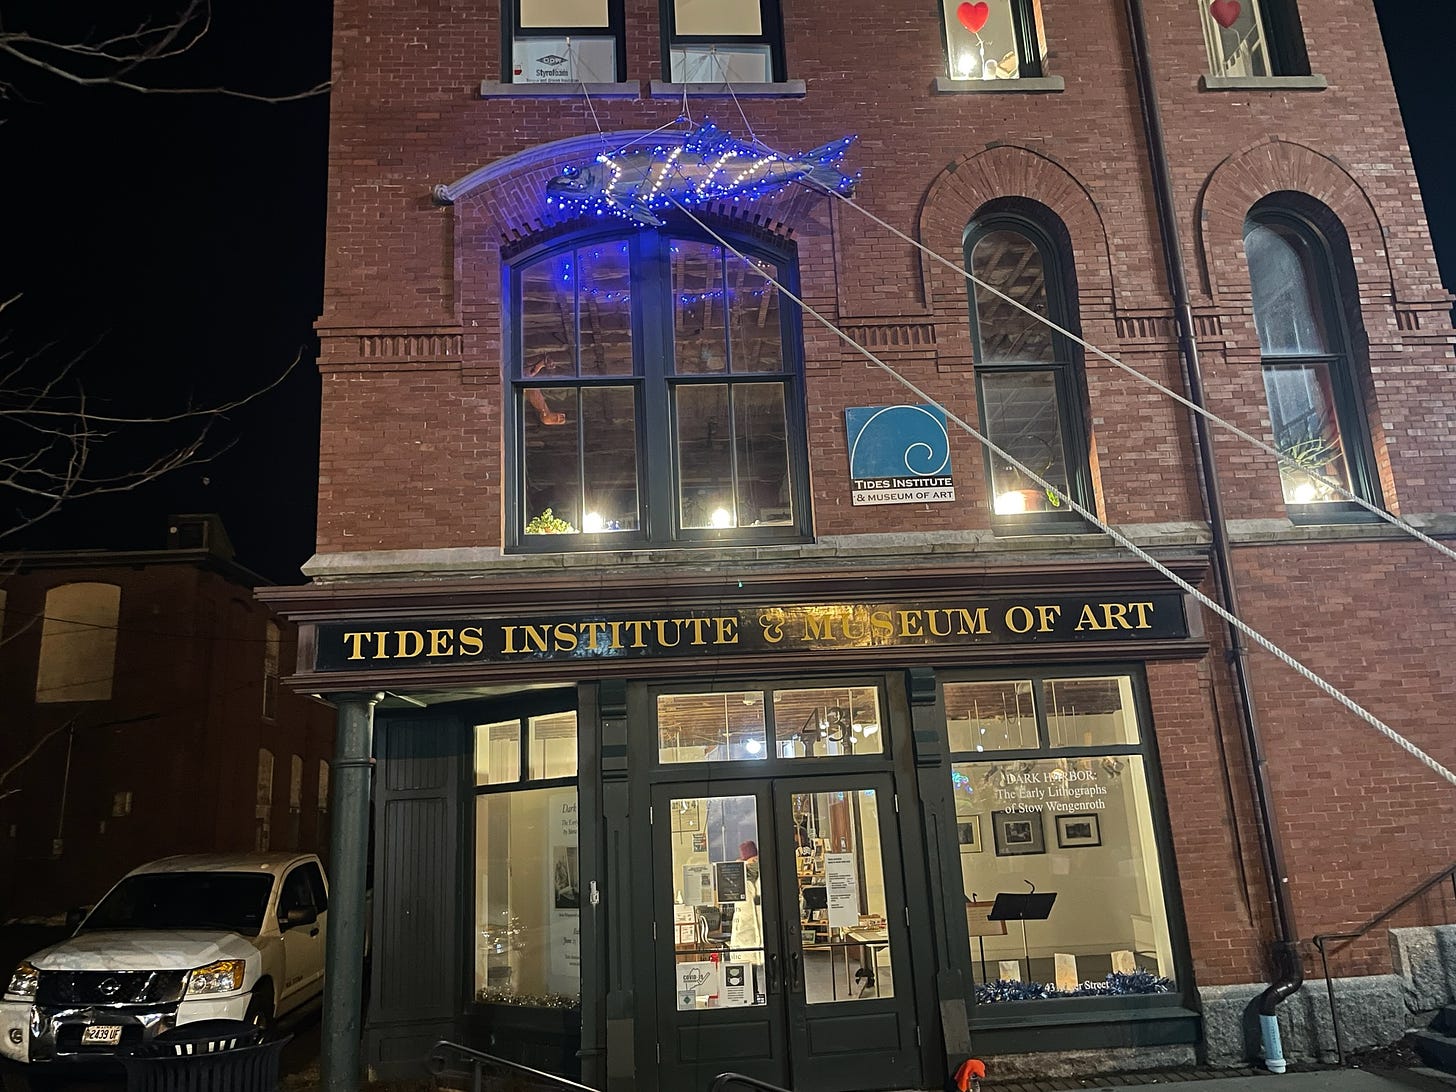 A cutout of a sardine is being hoisted up to the second story of a brick building that is the Tides Institute and Museum of Art